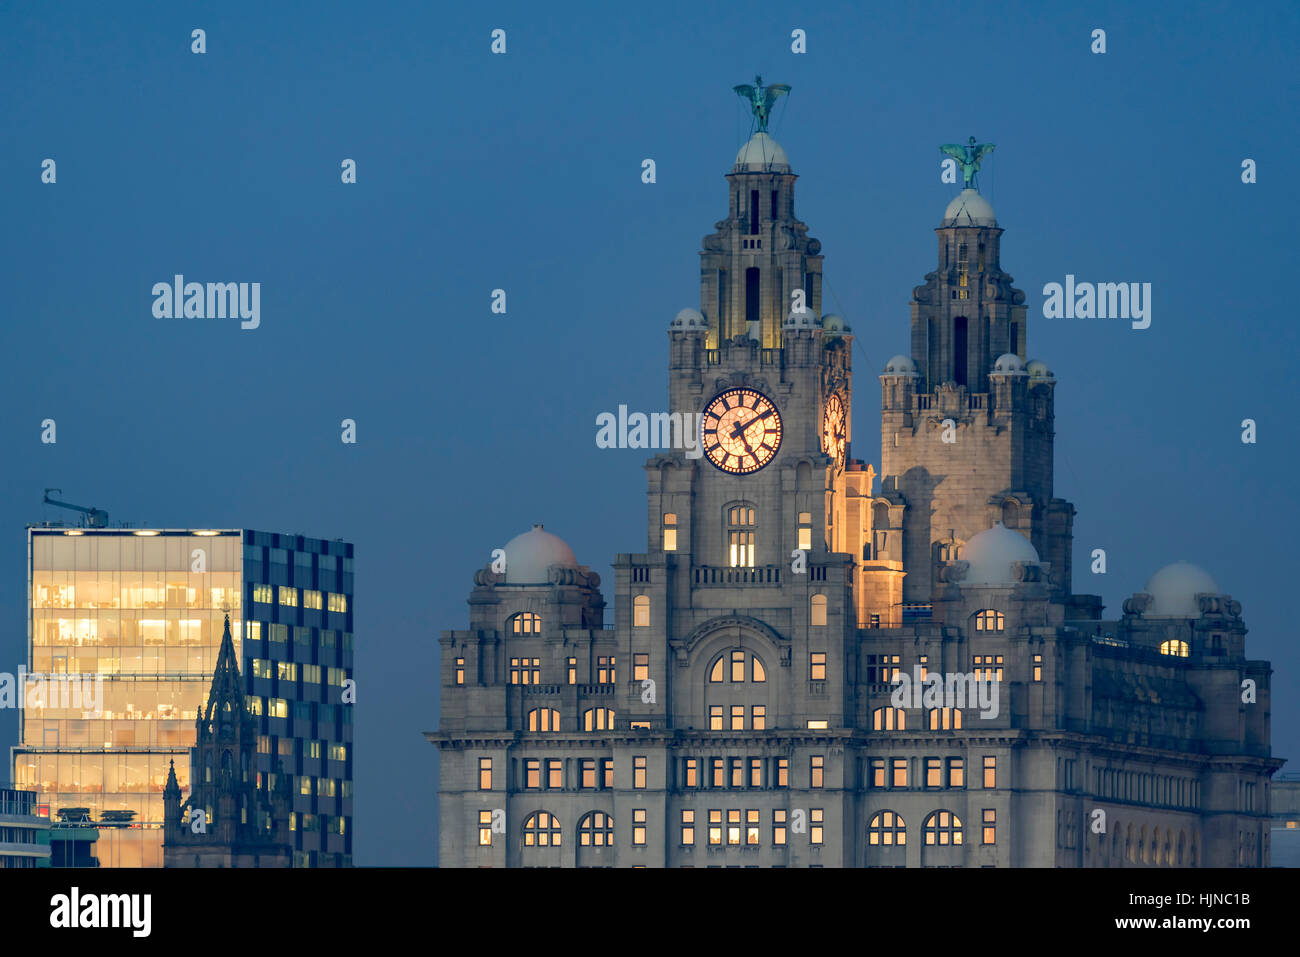 Royal Liver building in evening light. Stock Photo